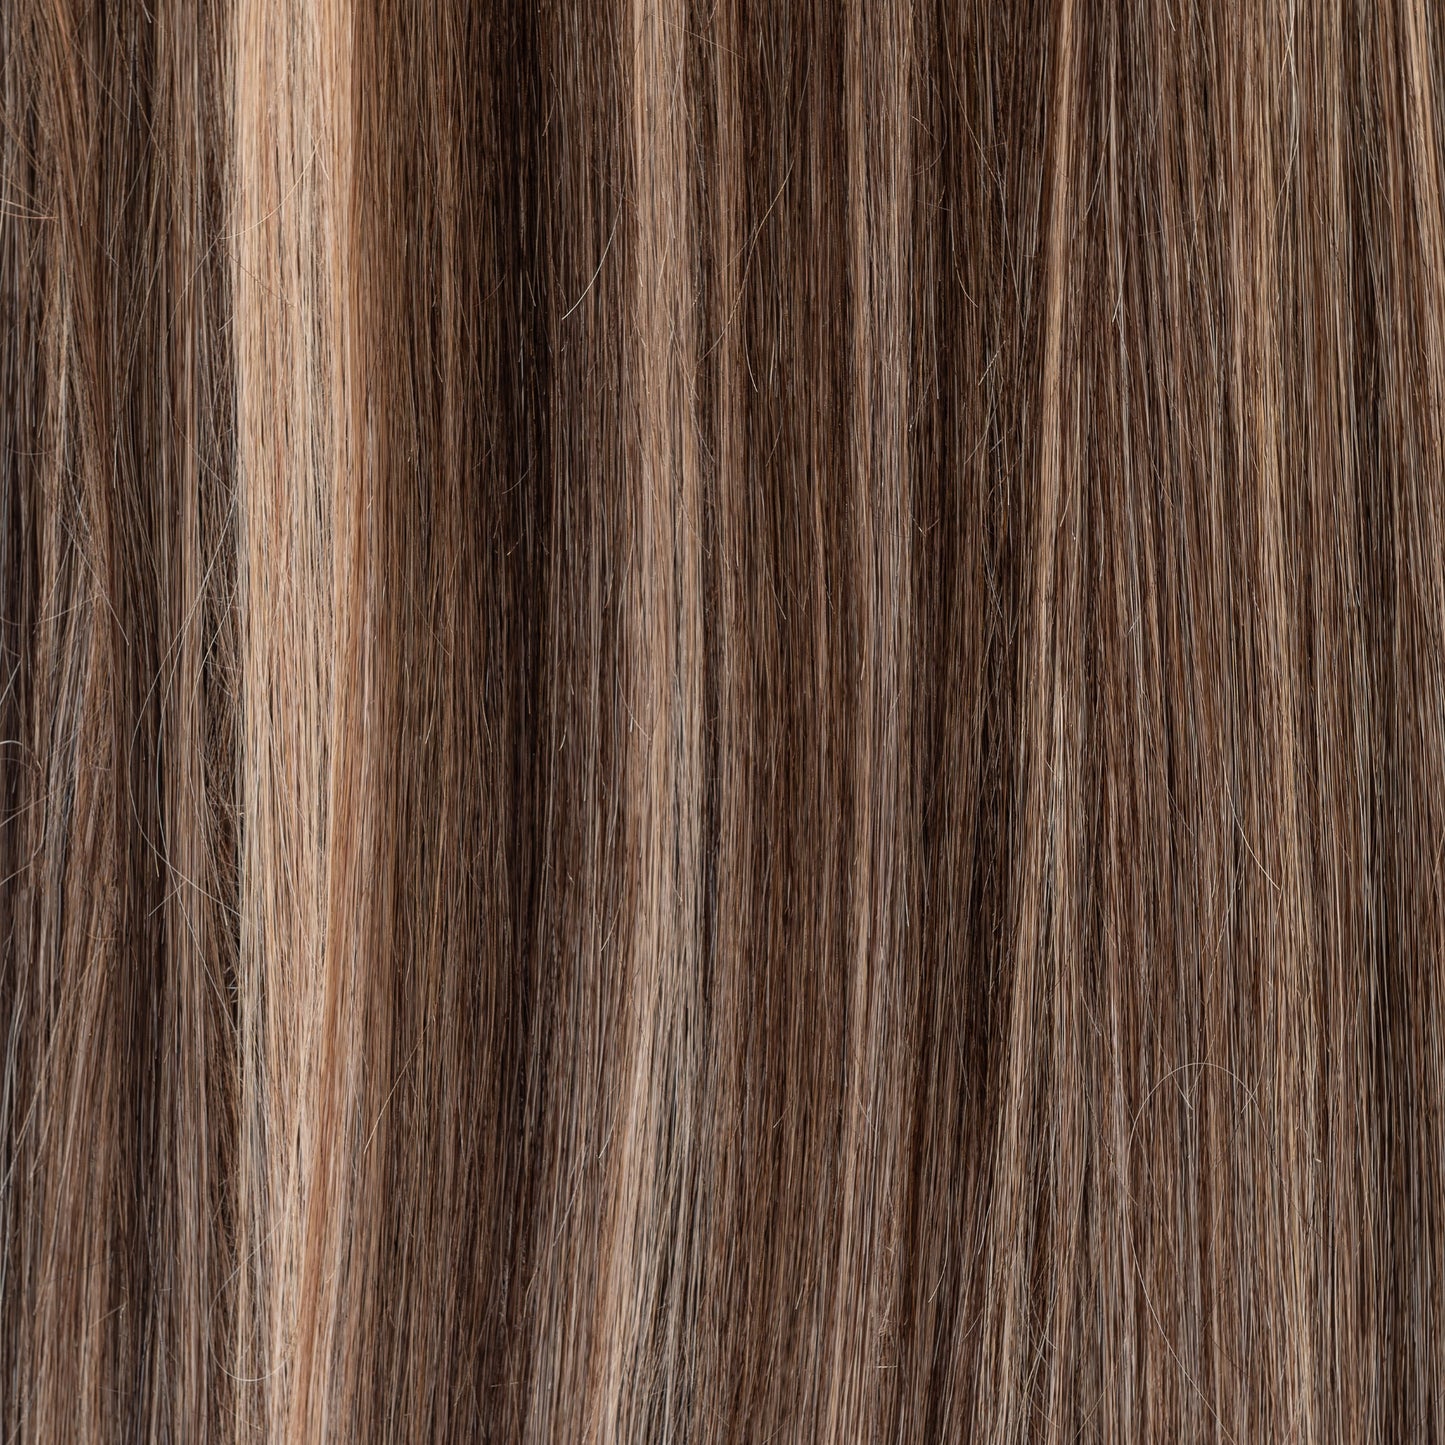 Clip-In Extensions – Honey Highlighted Blend